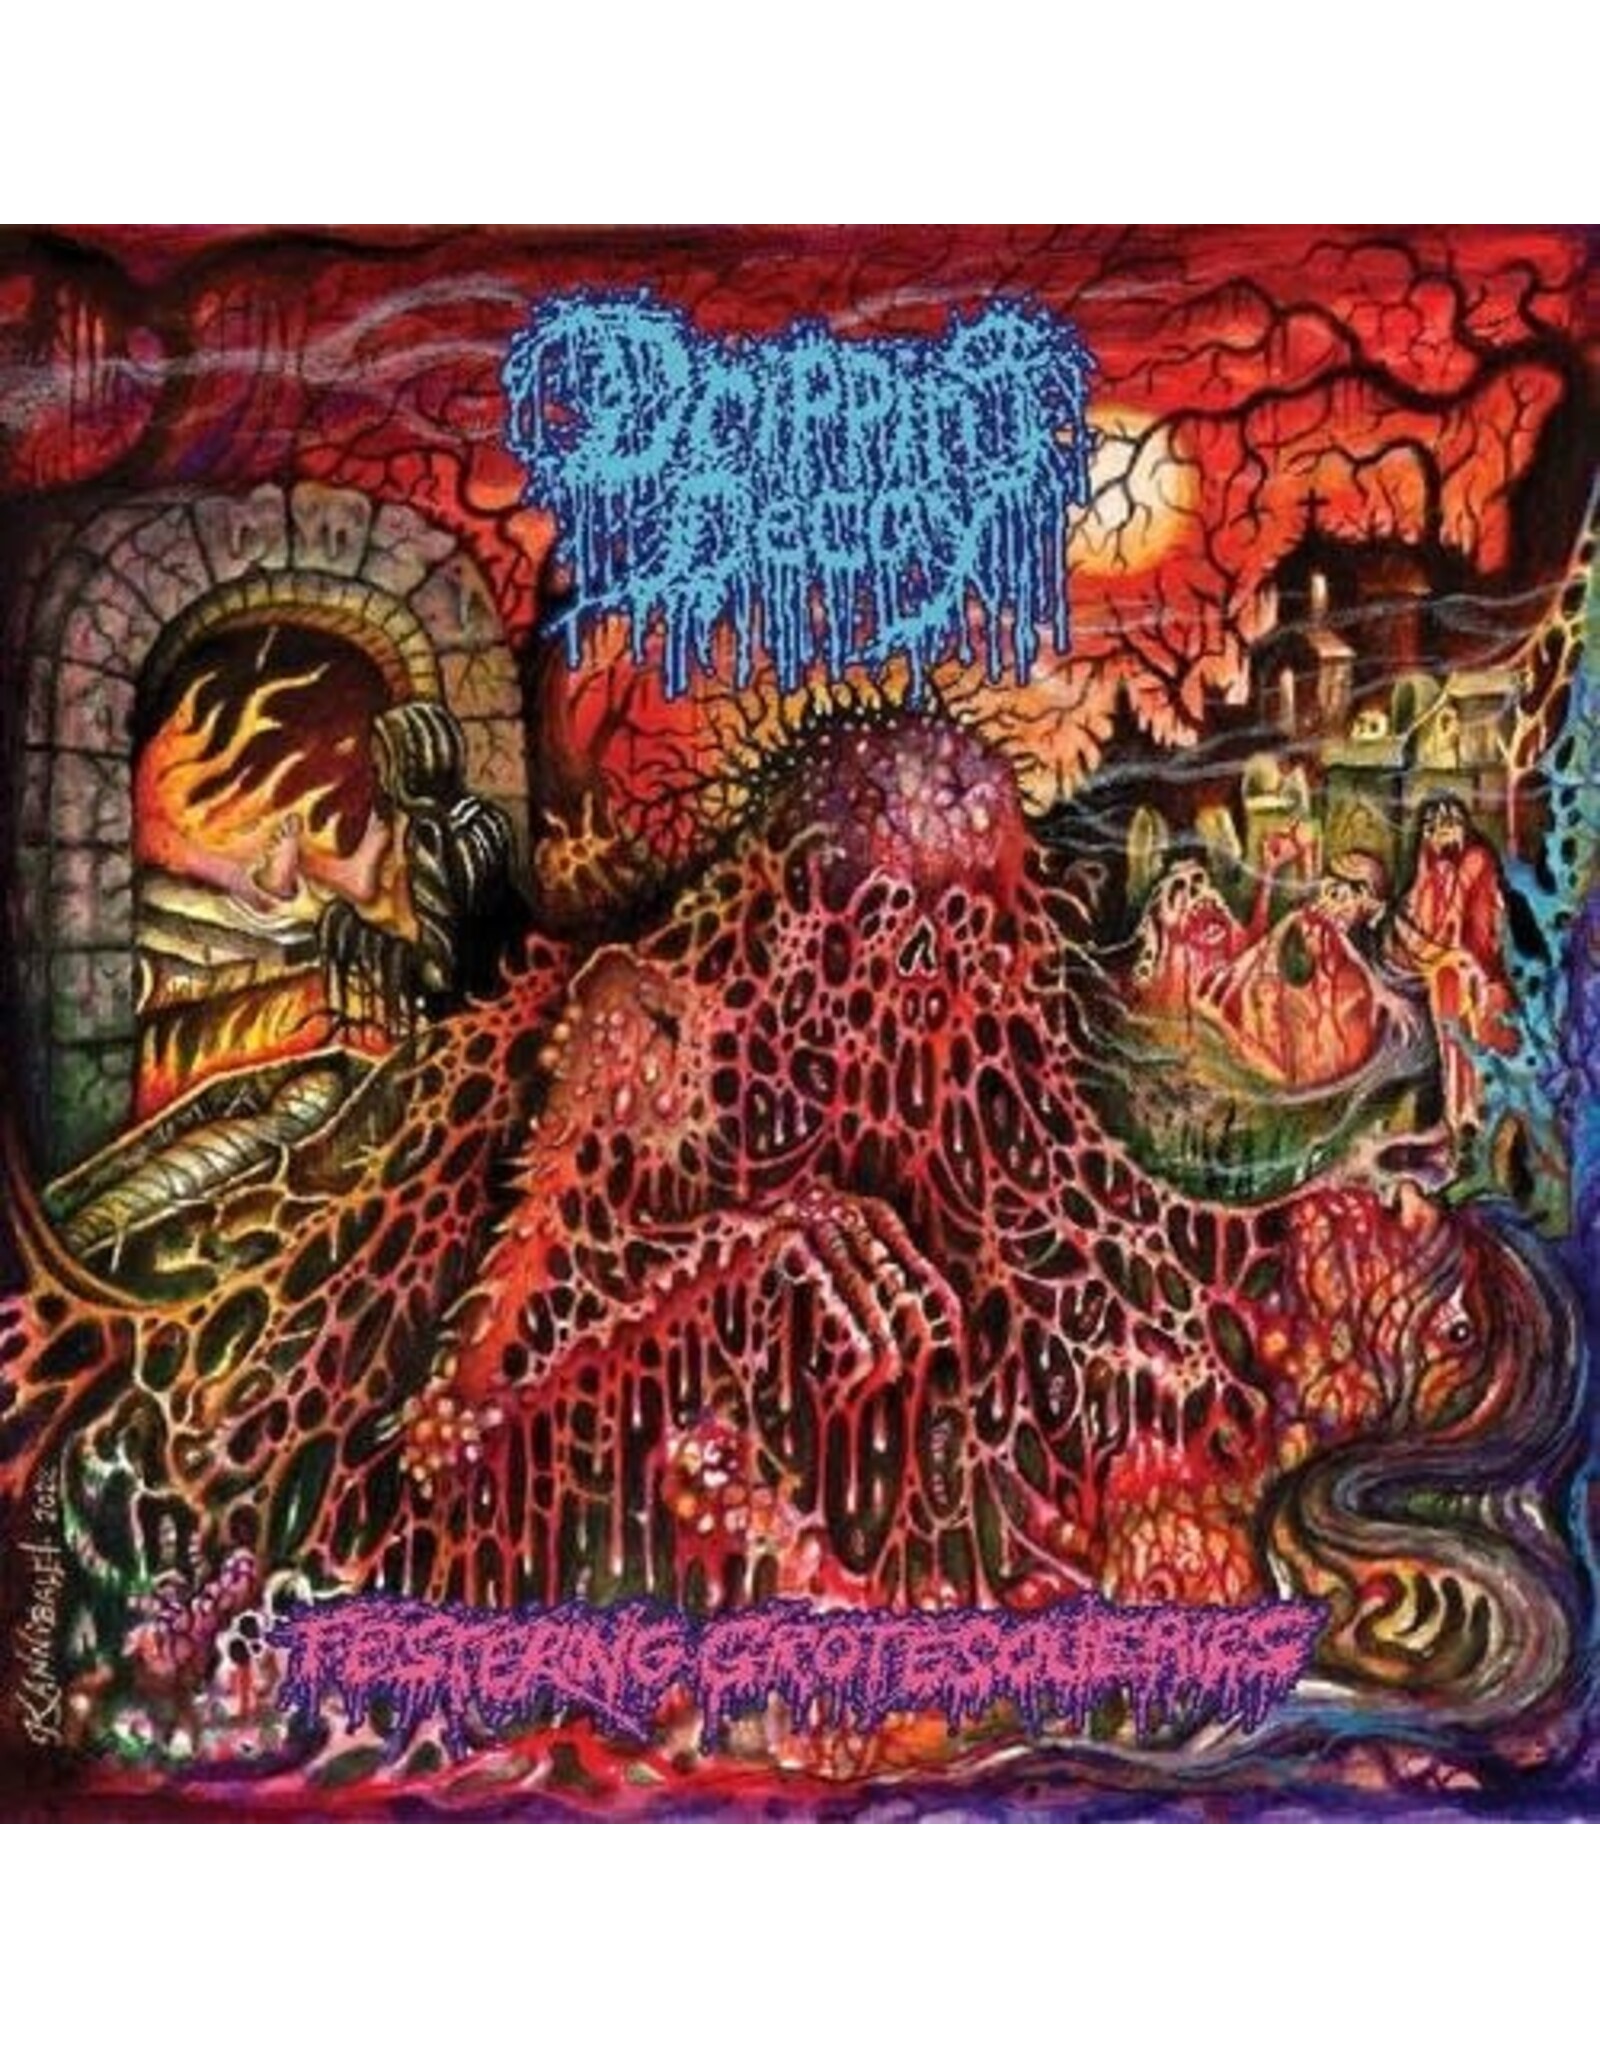 Dripping Decay - Festering Grotesqueries (Purple w/ Black and Red Splatter Vinyl) LP